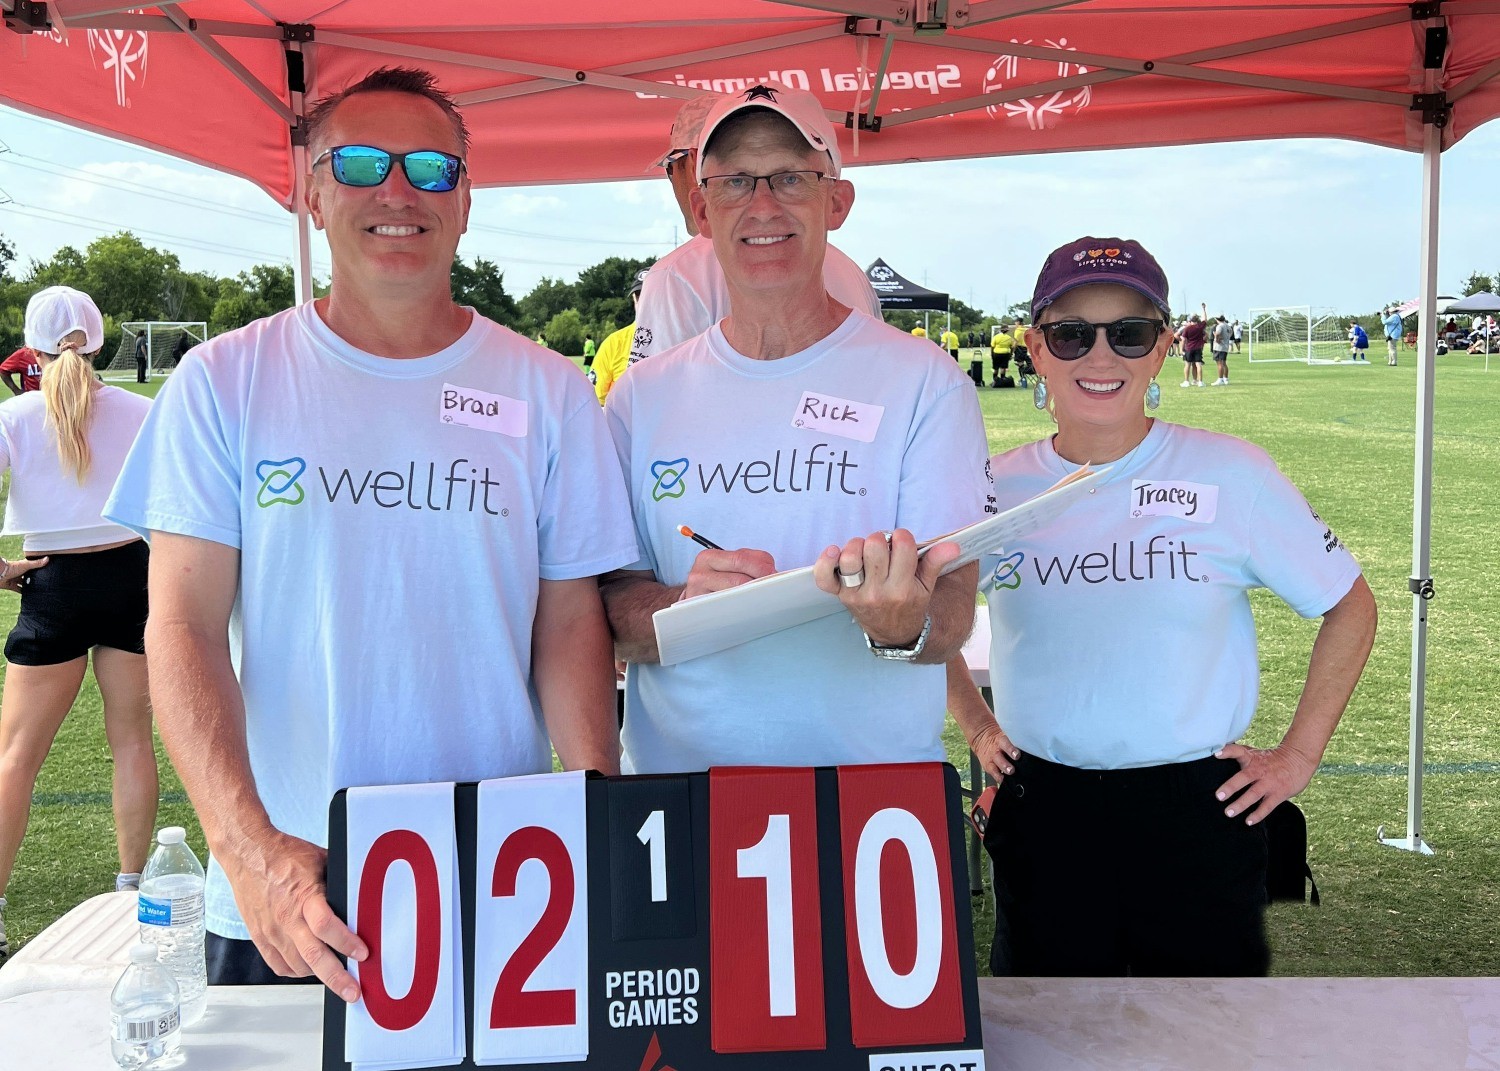 Goal! Team Wellfit hands out high fives and embraces the spirit of inclusion while volunteering at the Special Olympics.